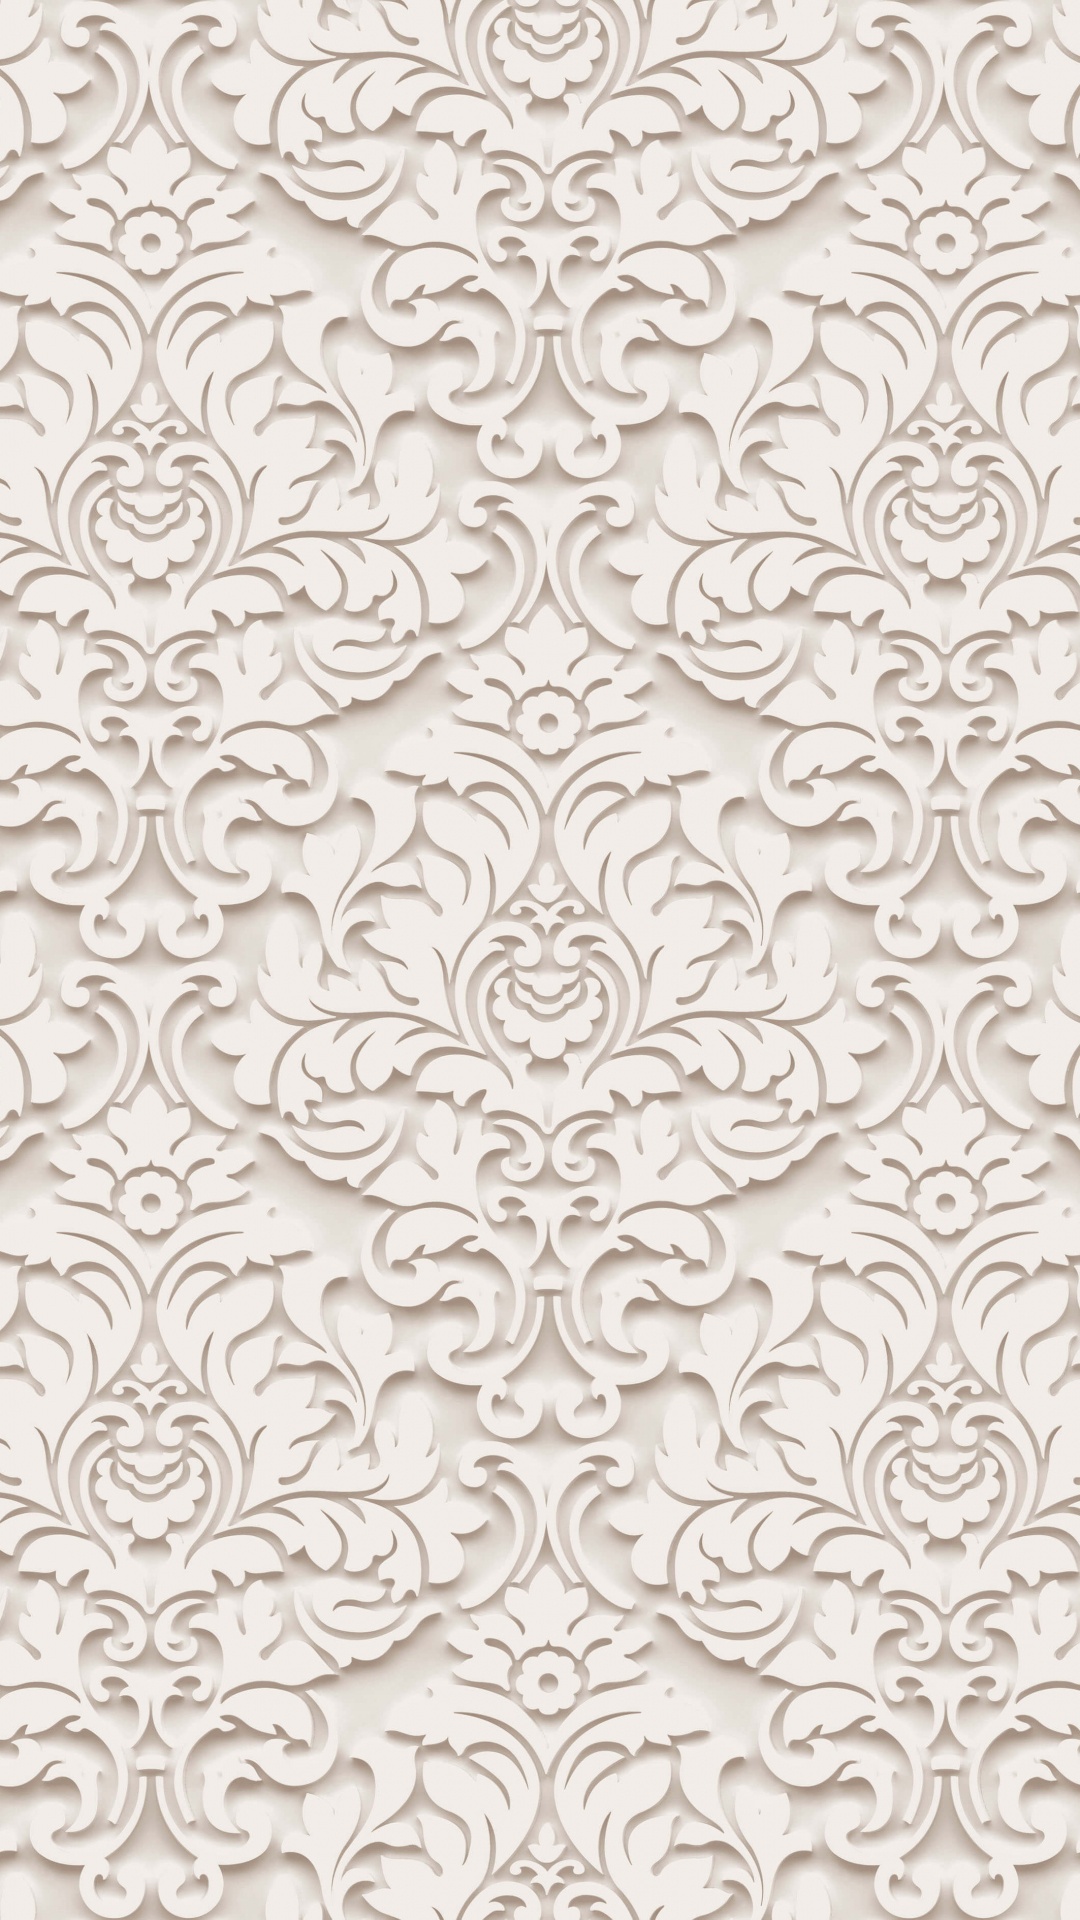 White and Black Floral Textile. Wallpaper in 1080x1920 Resolution